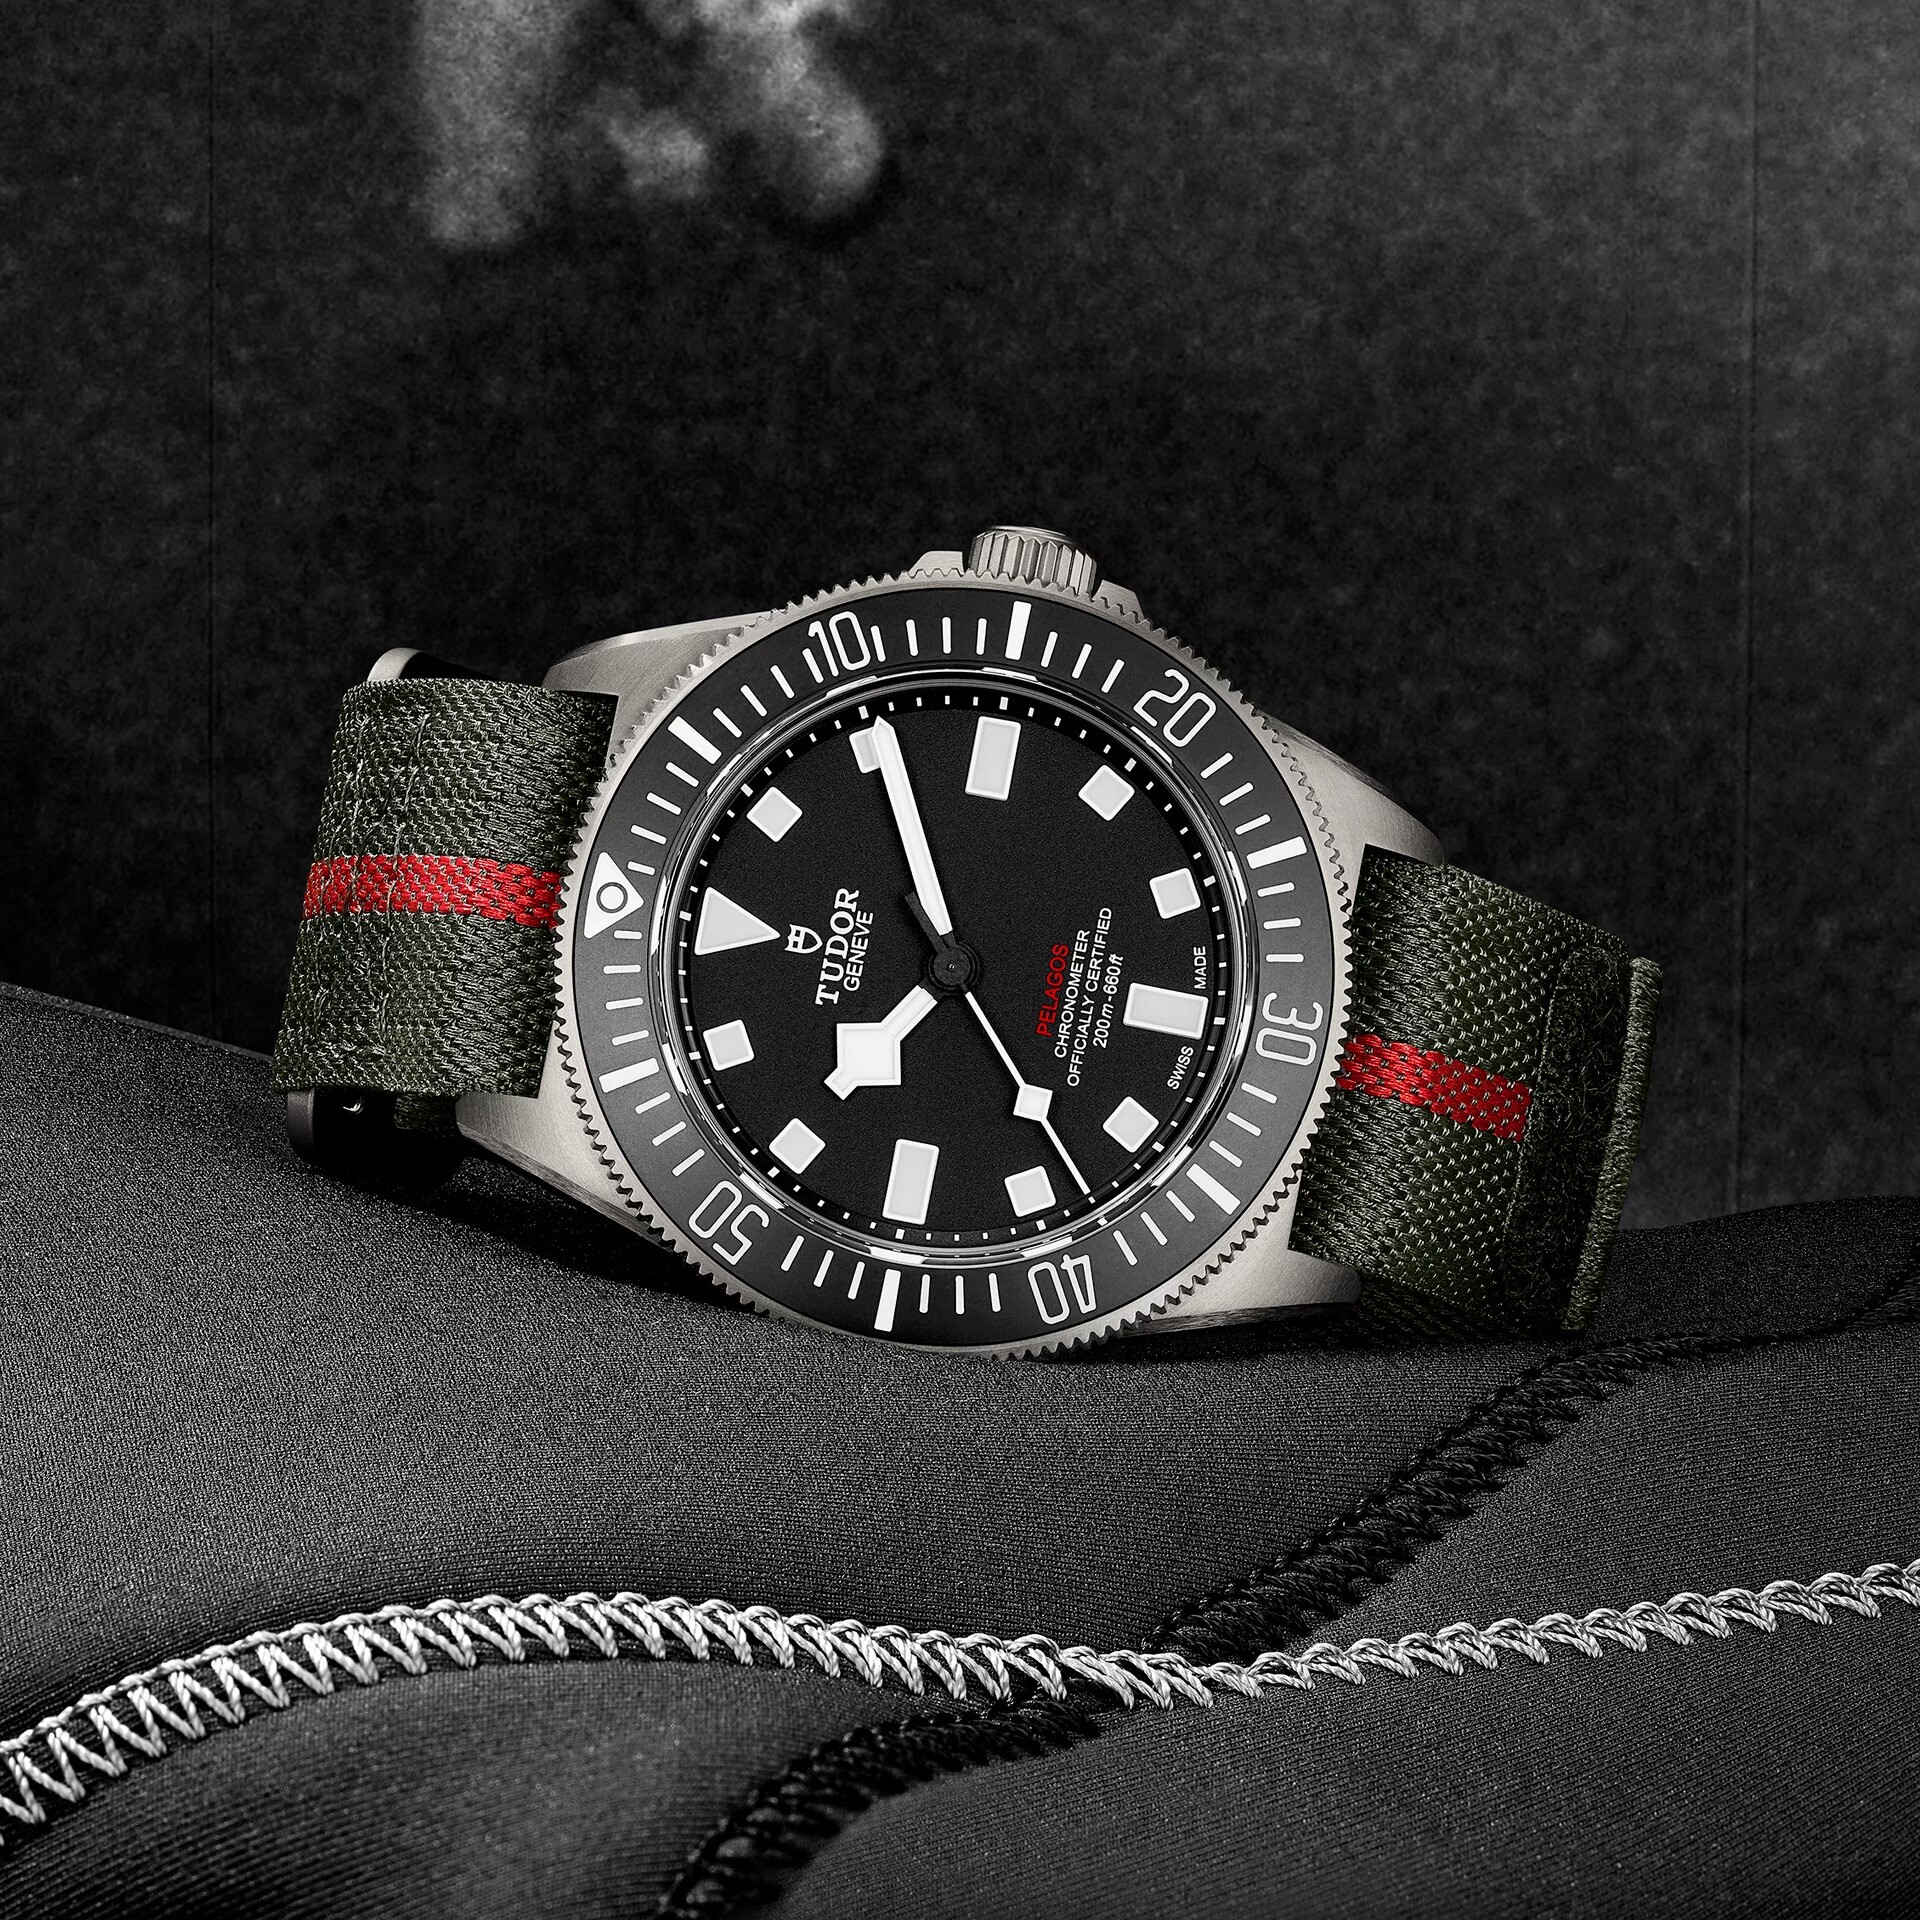 New Military-Inspired TUDOR Pelagos FXD - Worthy of the US Navy